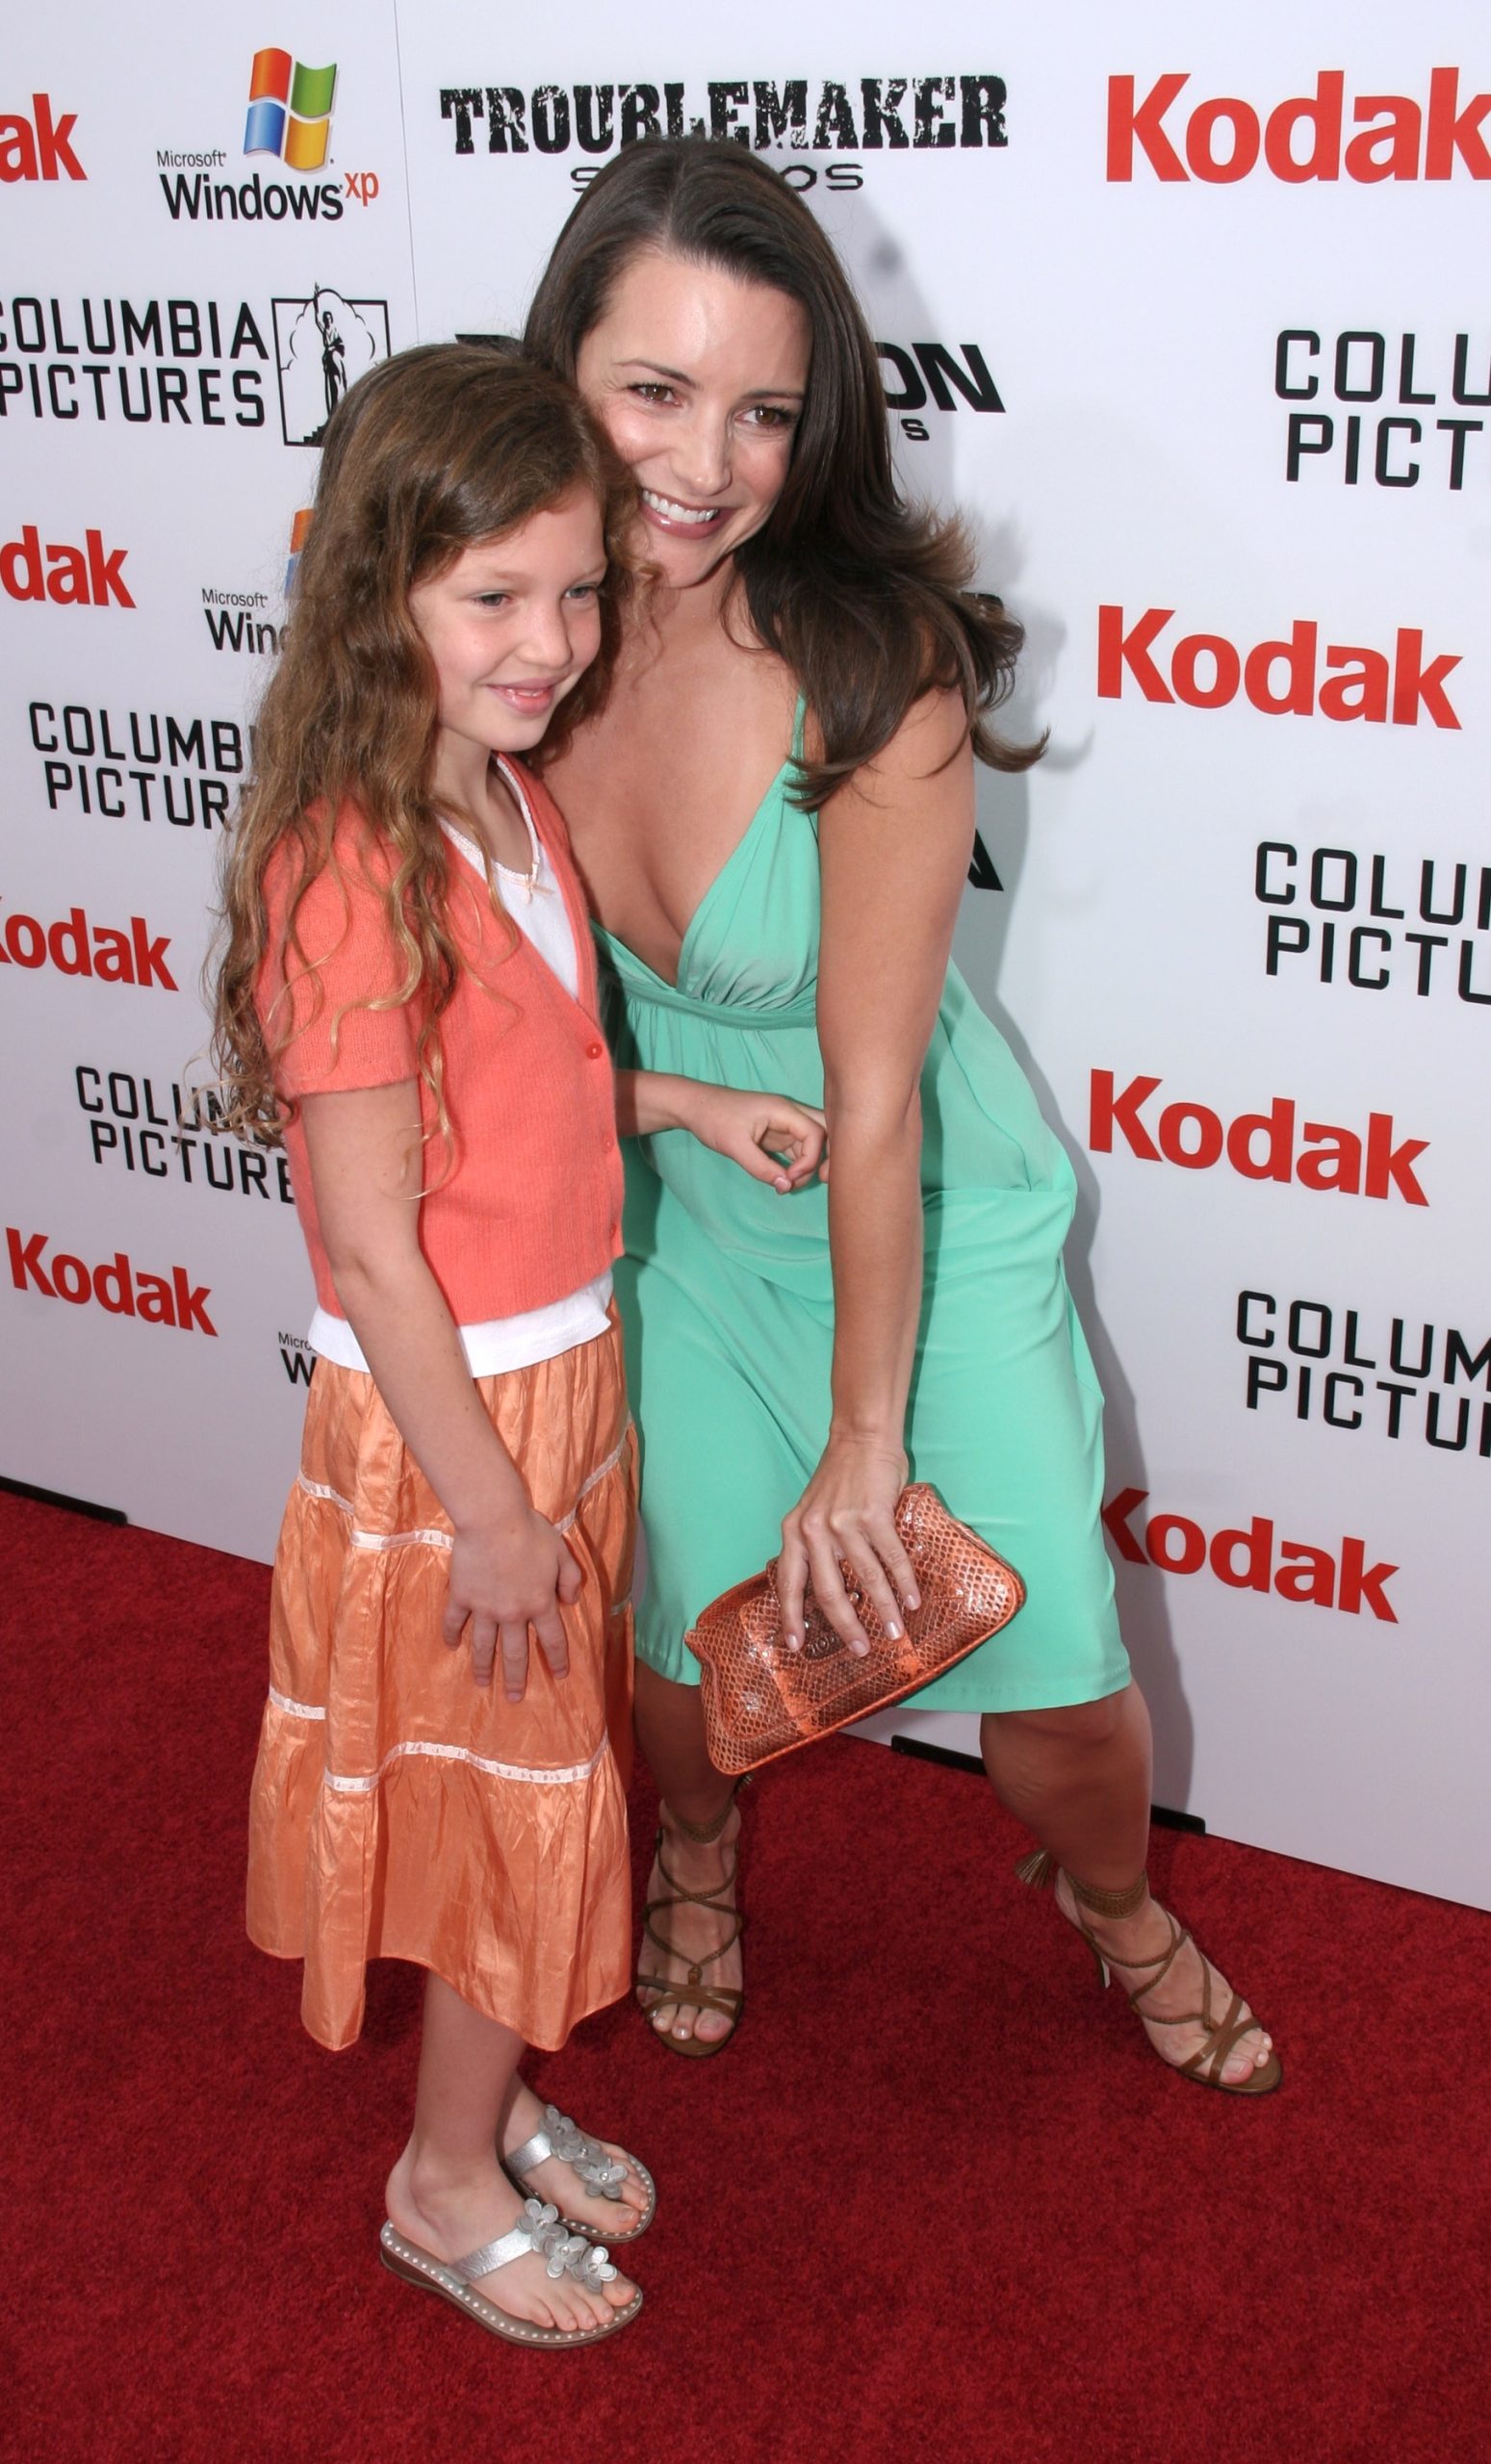 Premiere Of The Adventures Of Sharkboy And Lavagirl In Hollywood Los Angeles United States On June 04 2005